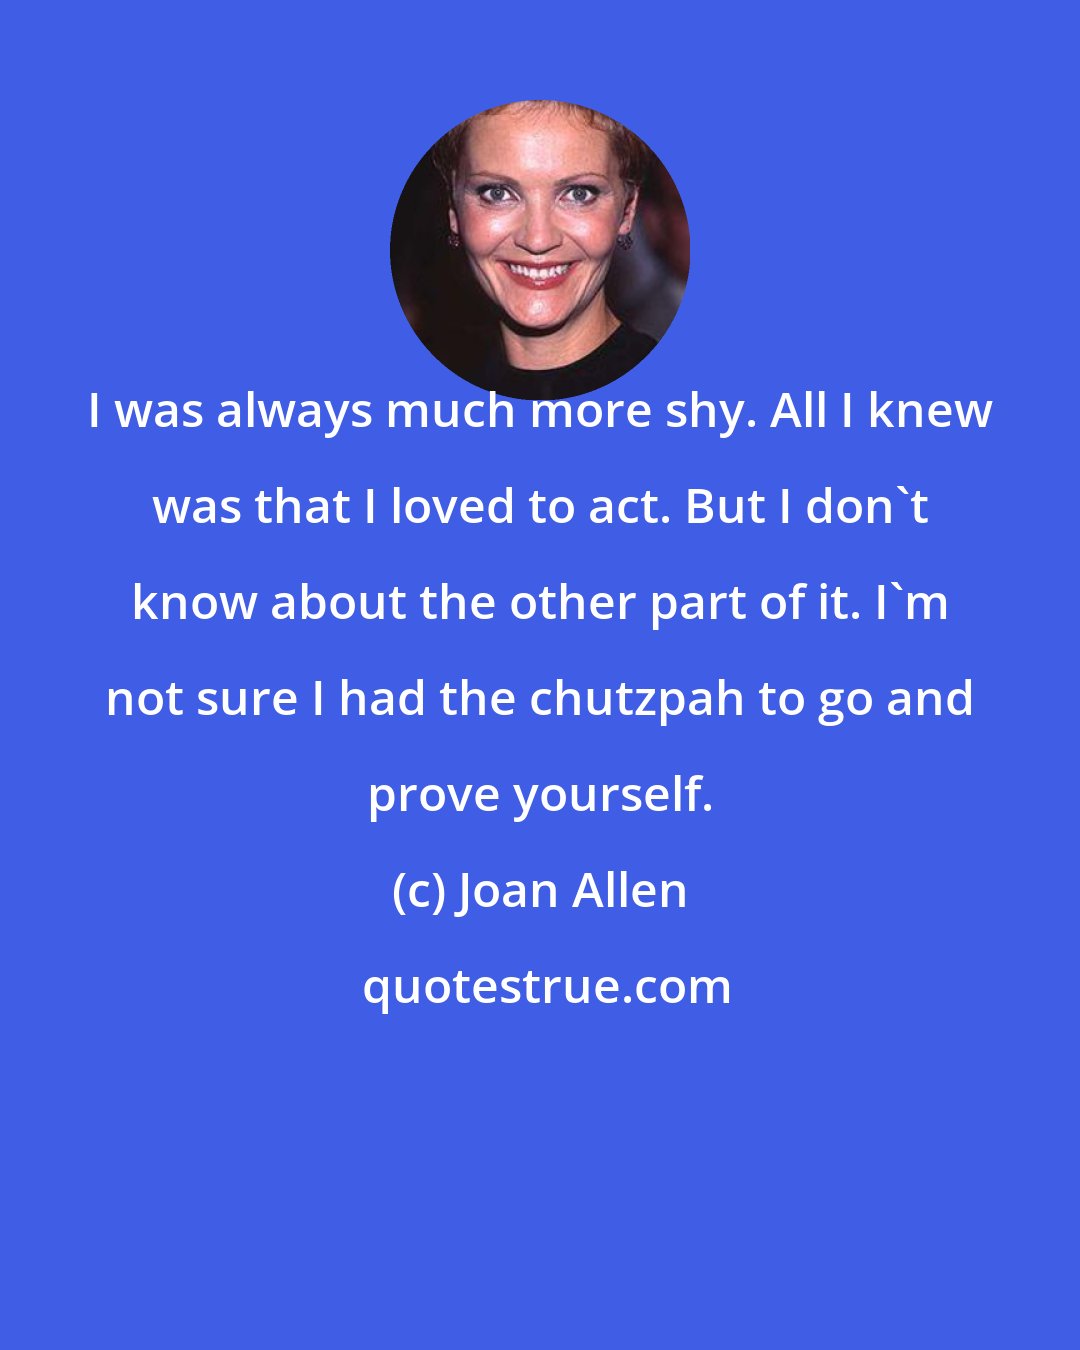 Joan Allen: I was always much more shy. All I knew was that I loved to act. But I don't know about the other part of it. I'm not sure I had the chutzpah to go and prove yourself.